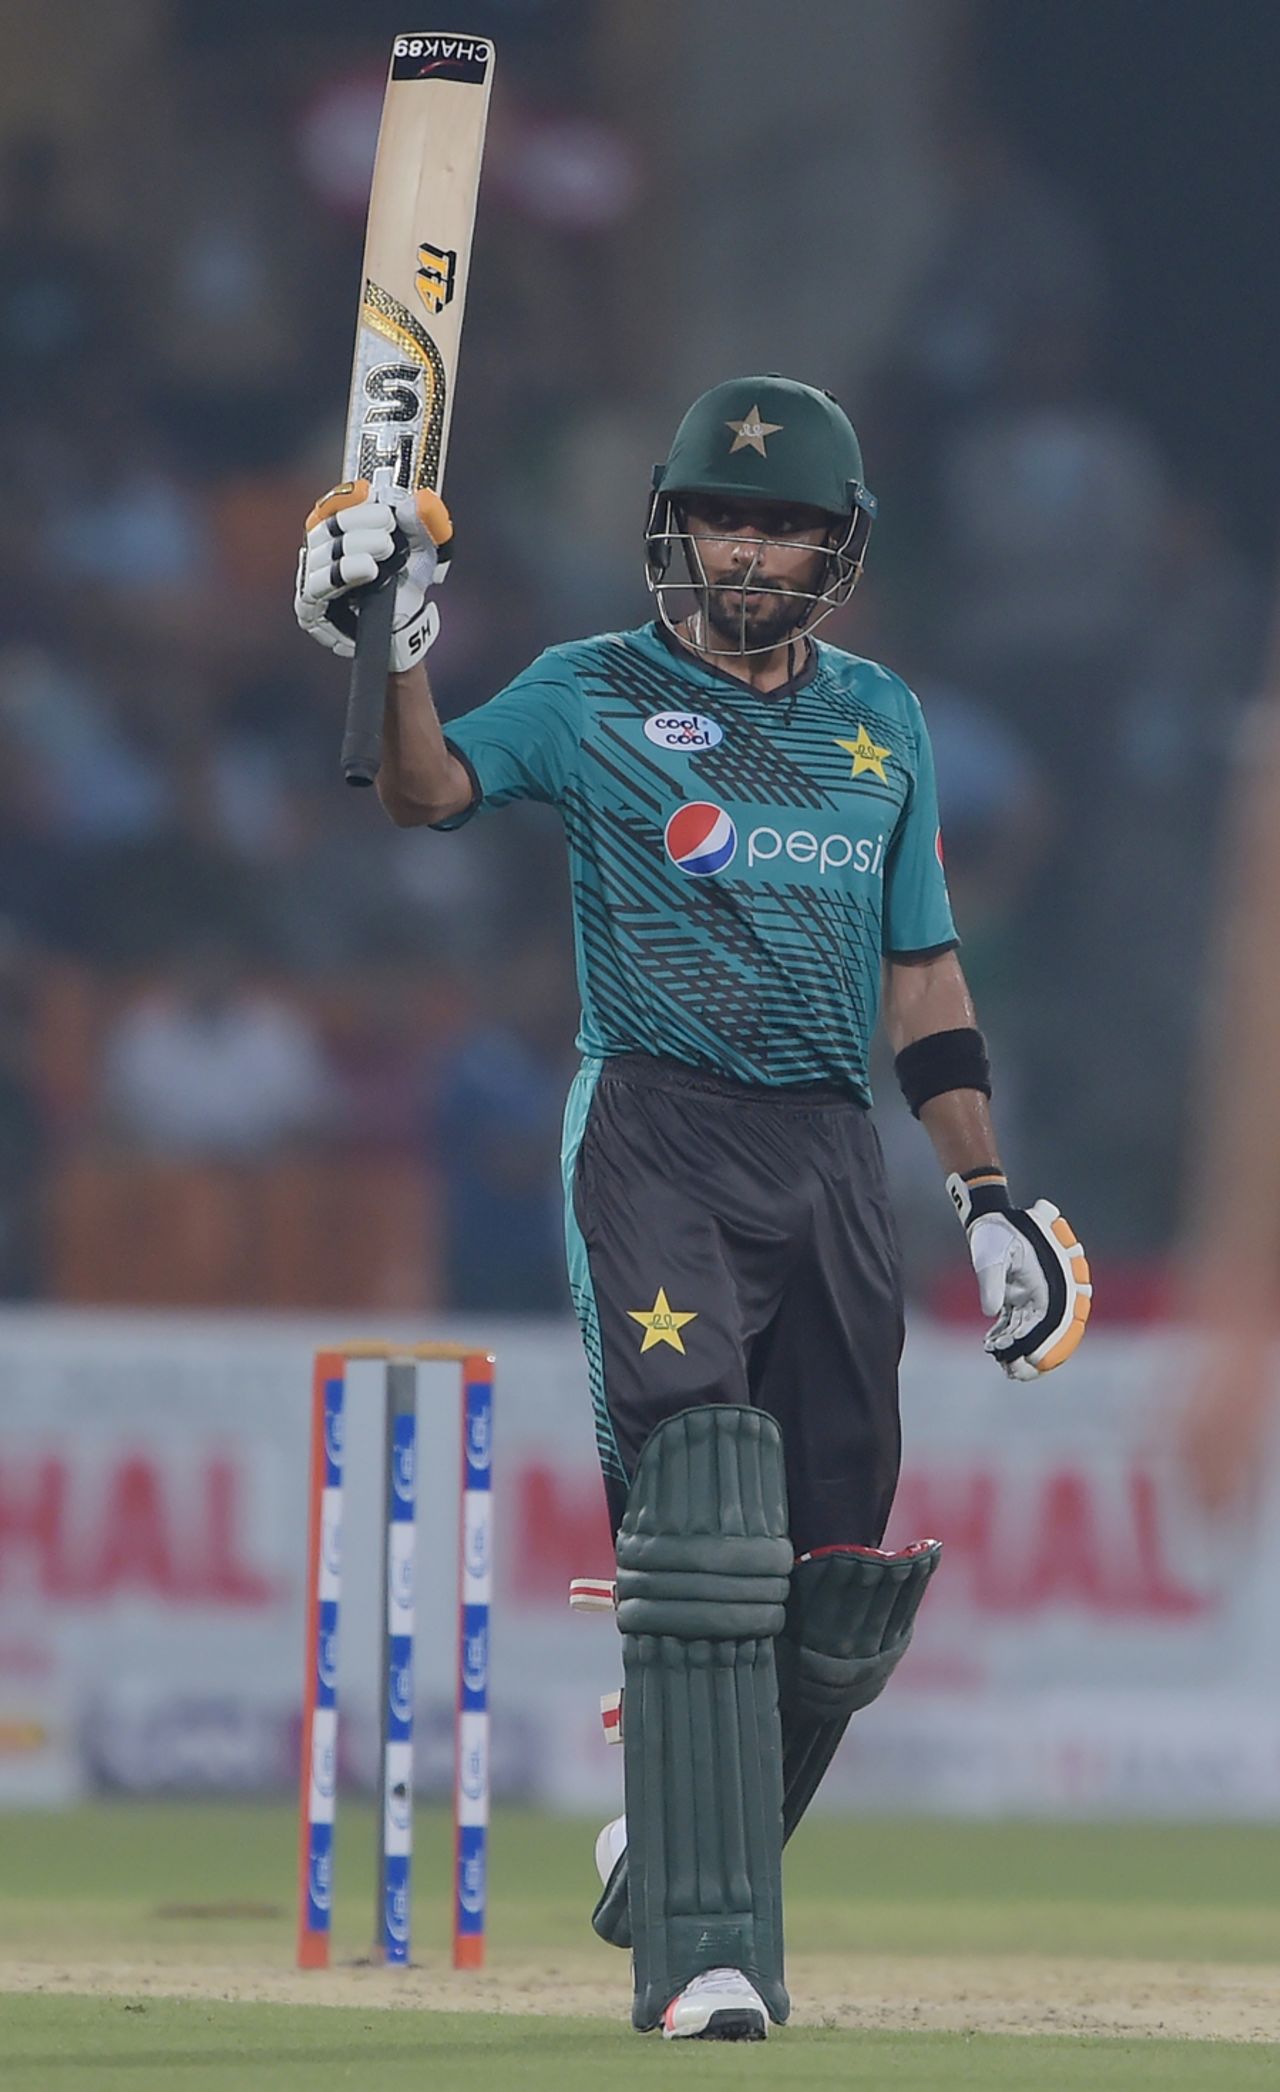 Babar Azam raises his bat after getting to his half century, Pakistan v World XI, 1st T20I, Independence Cup 2017, Lahore, September 12, 2017